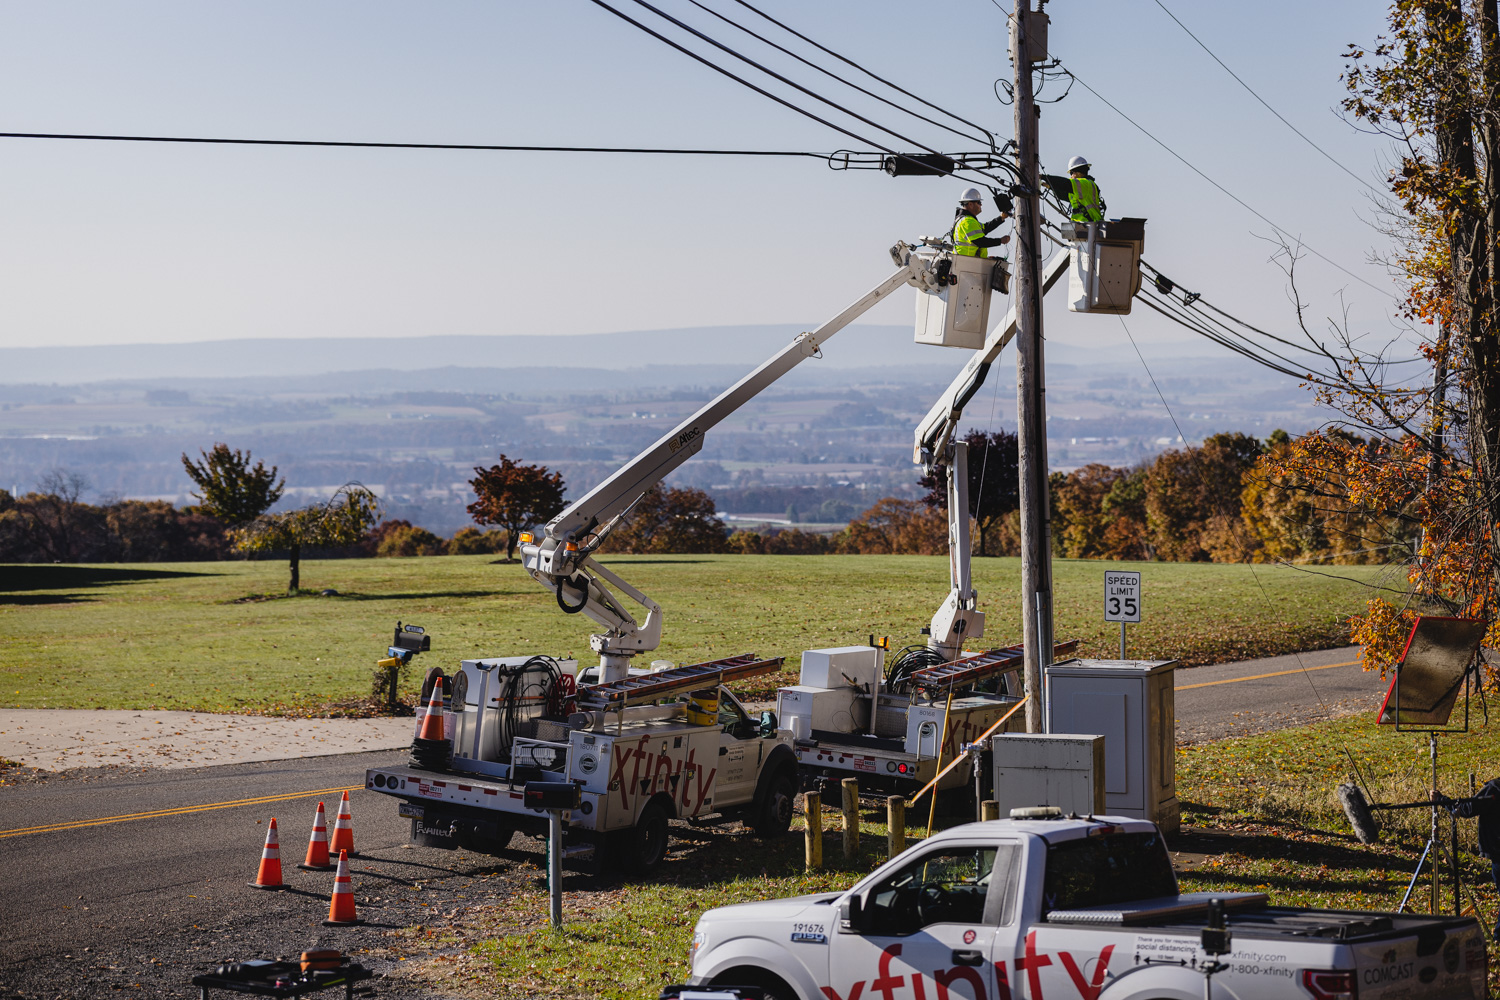 Comcast Completes Network Expansion in Blair County Bringing Service to 7,200 Homes and Businesses